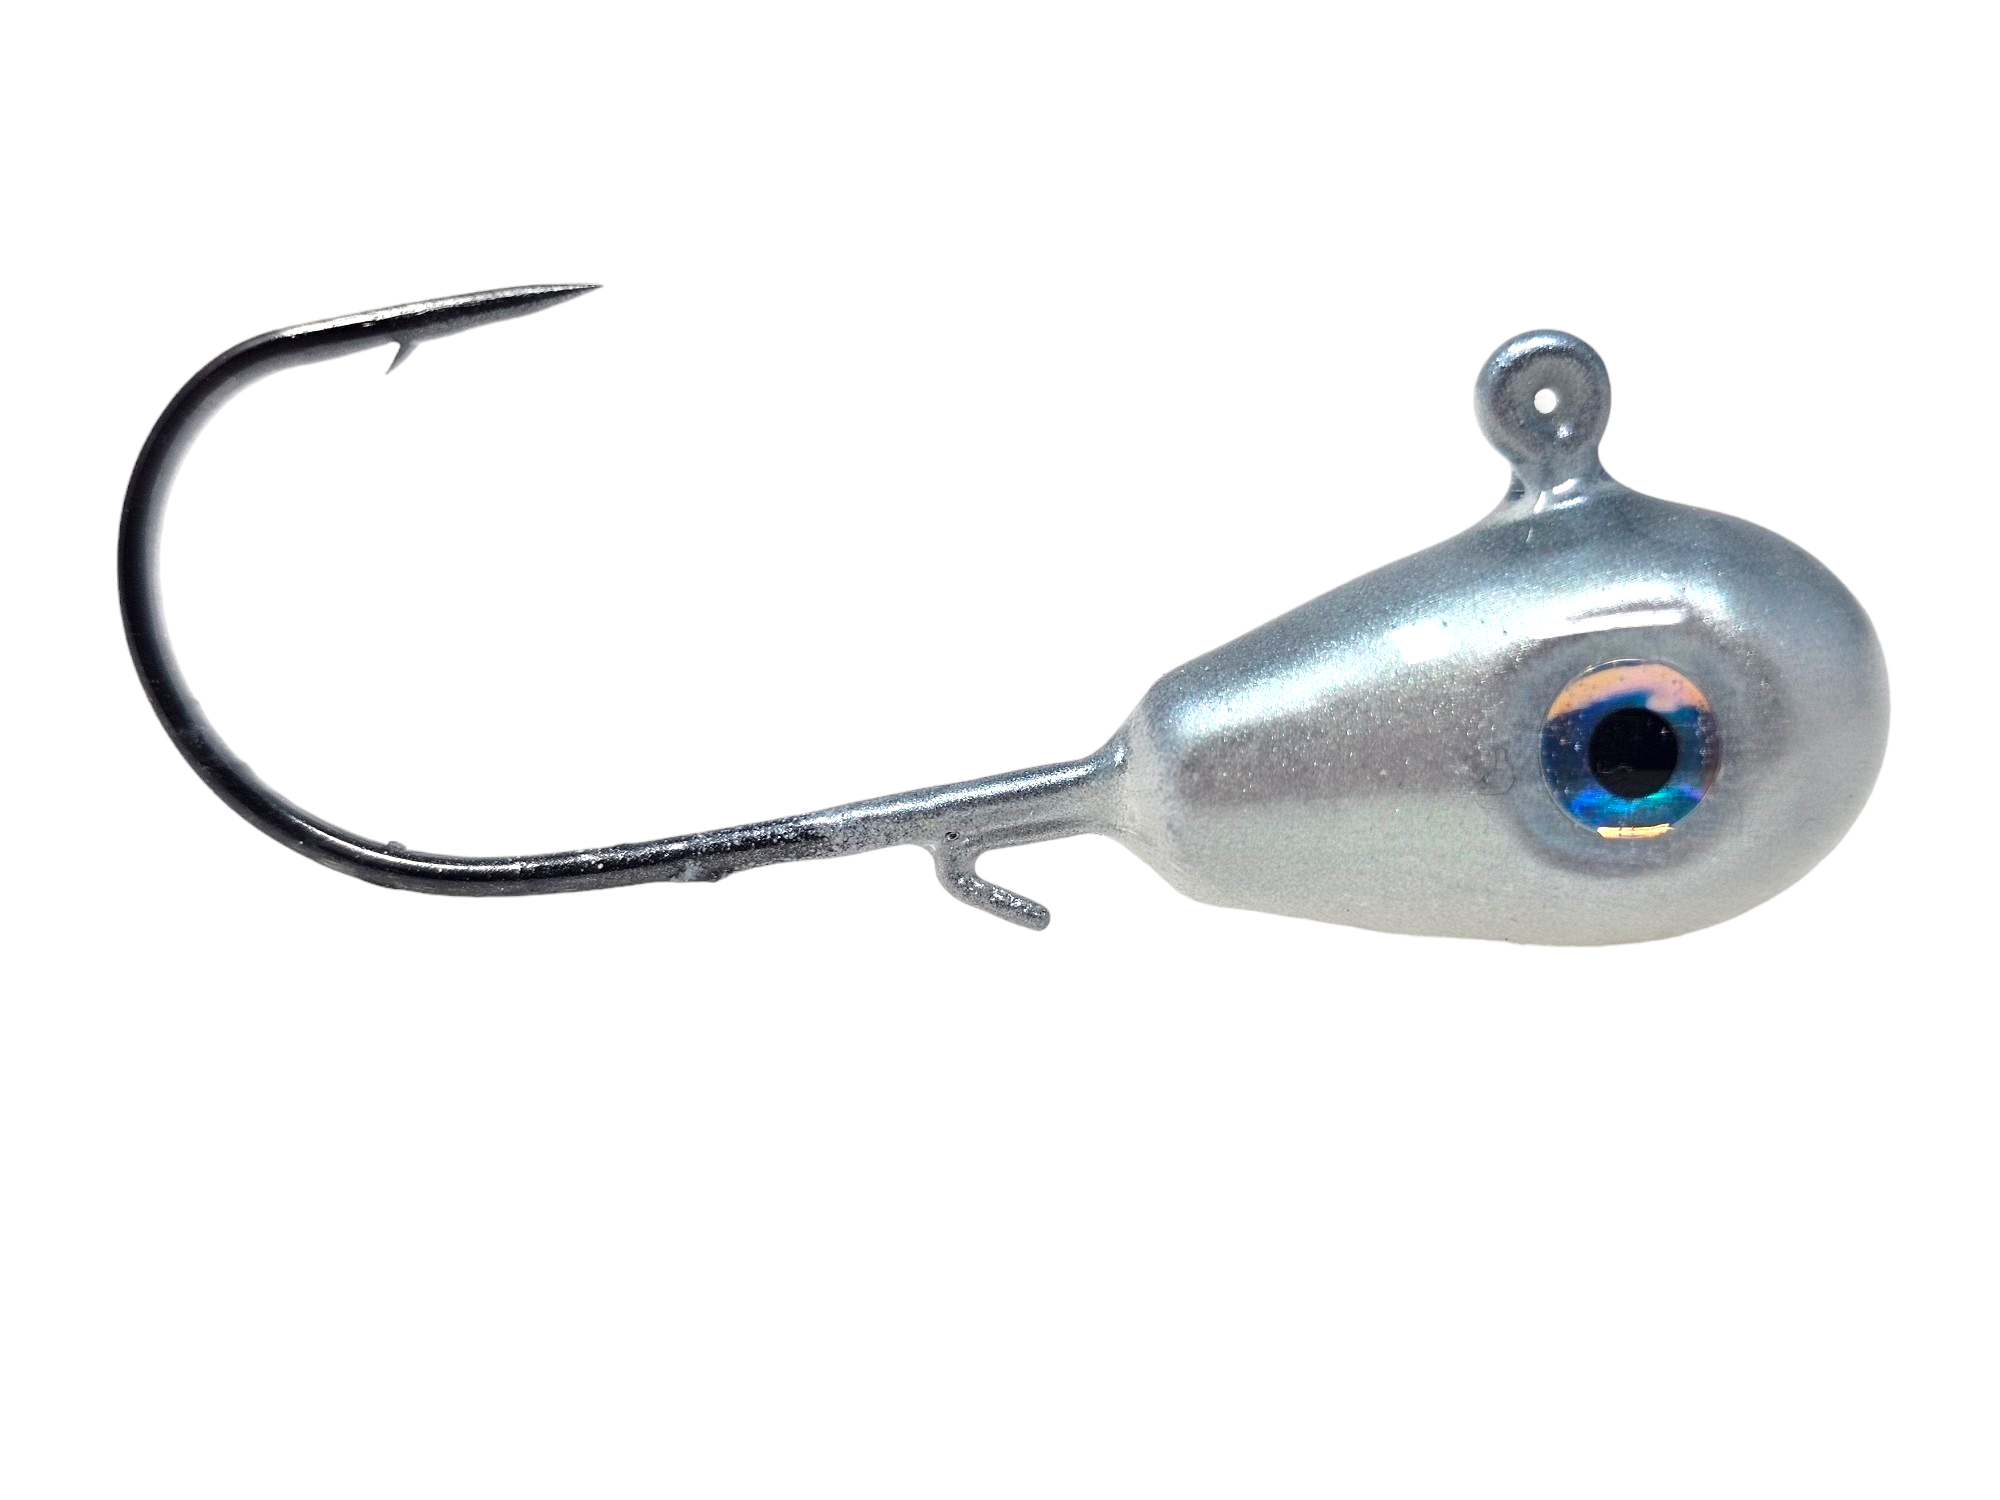 Lightning fast fishing hook change out with this #fishingtip from Kevi